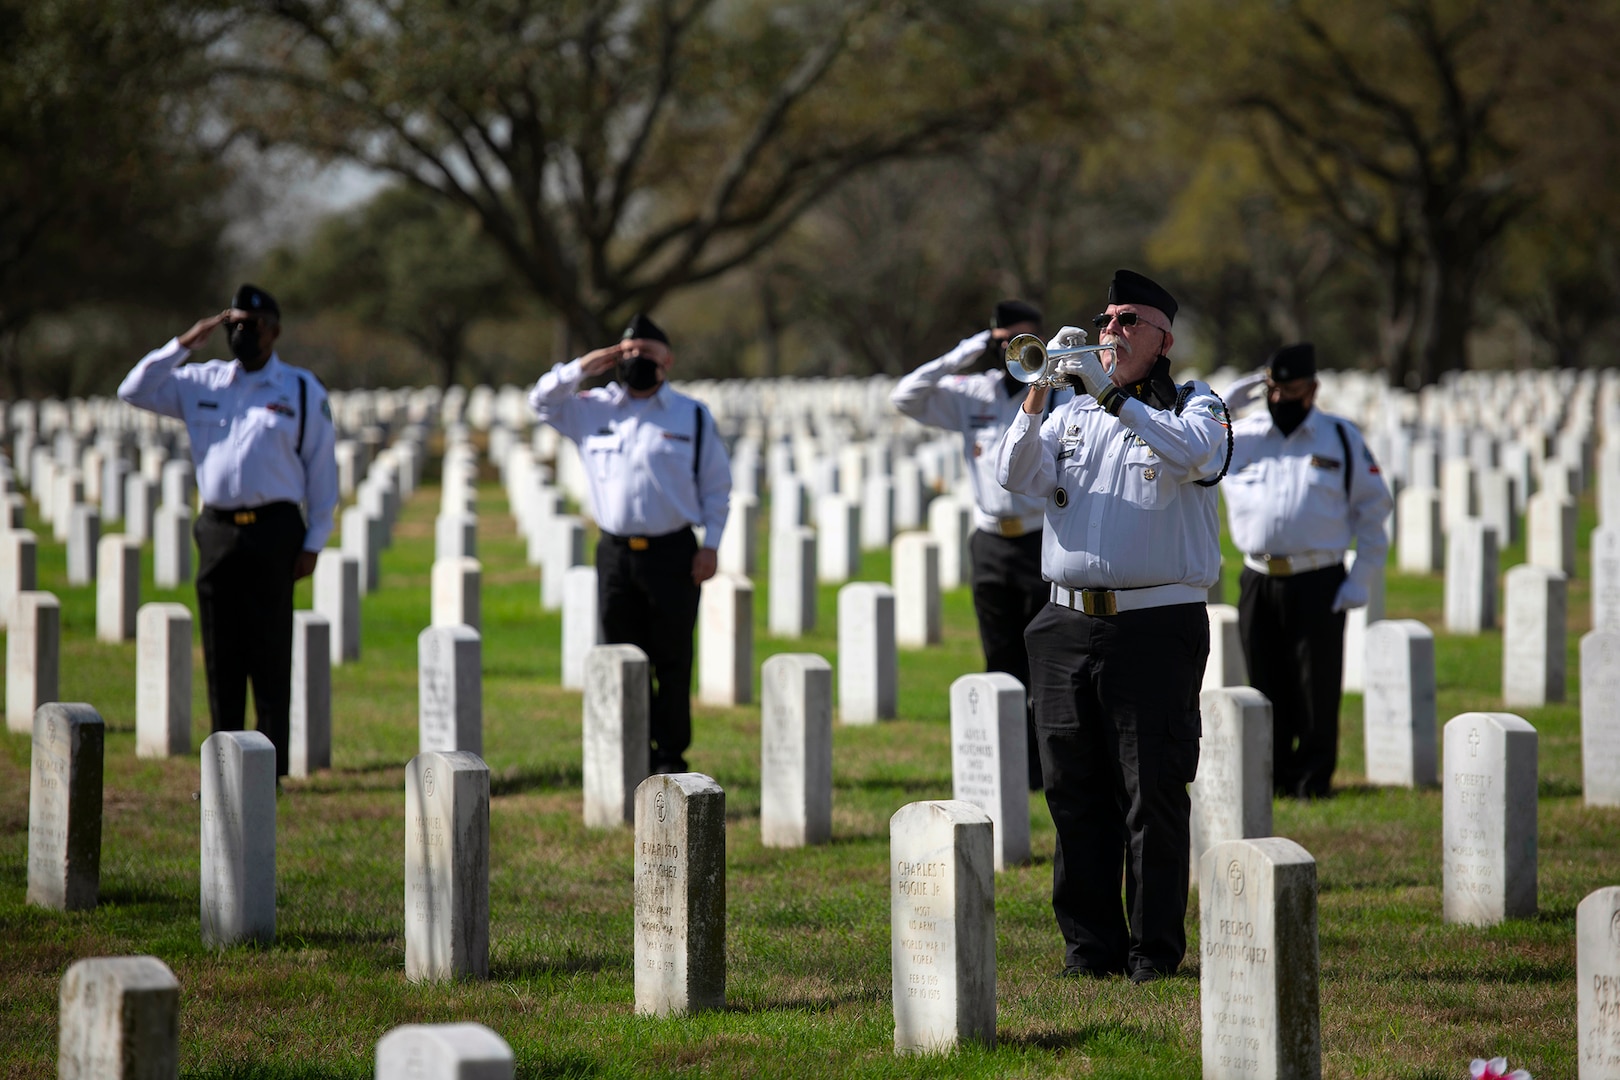 Mike Kinkade, bugler for the Fort Sam Houston Memorial Services Detachment, plays “Taps” during a funeral at the Fort Sam Houston National Cemetery in San Antonio March 15. The funeral marked the detachment’s 40,000th funeral service.